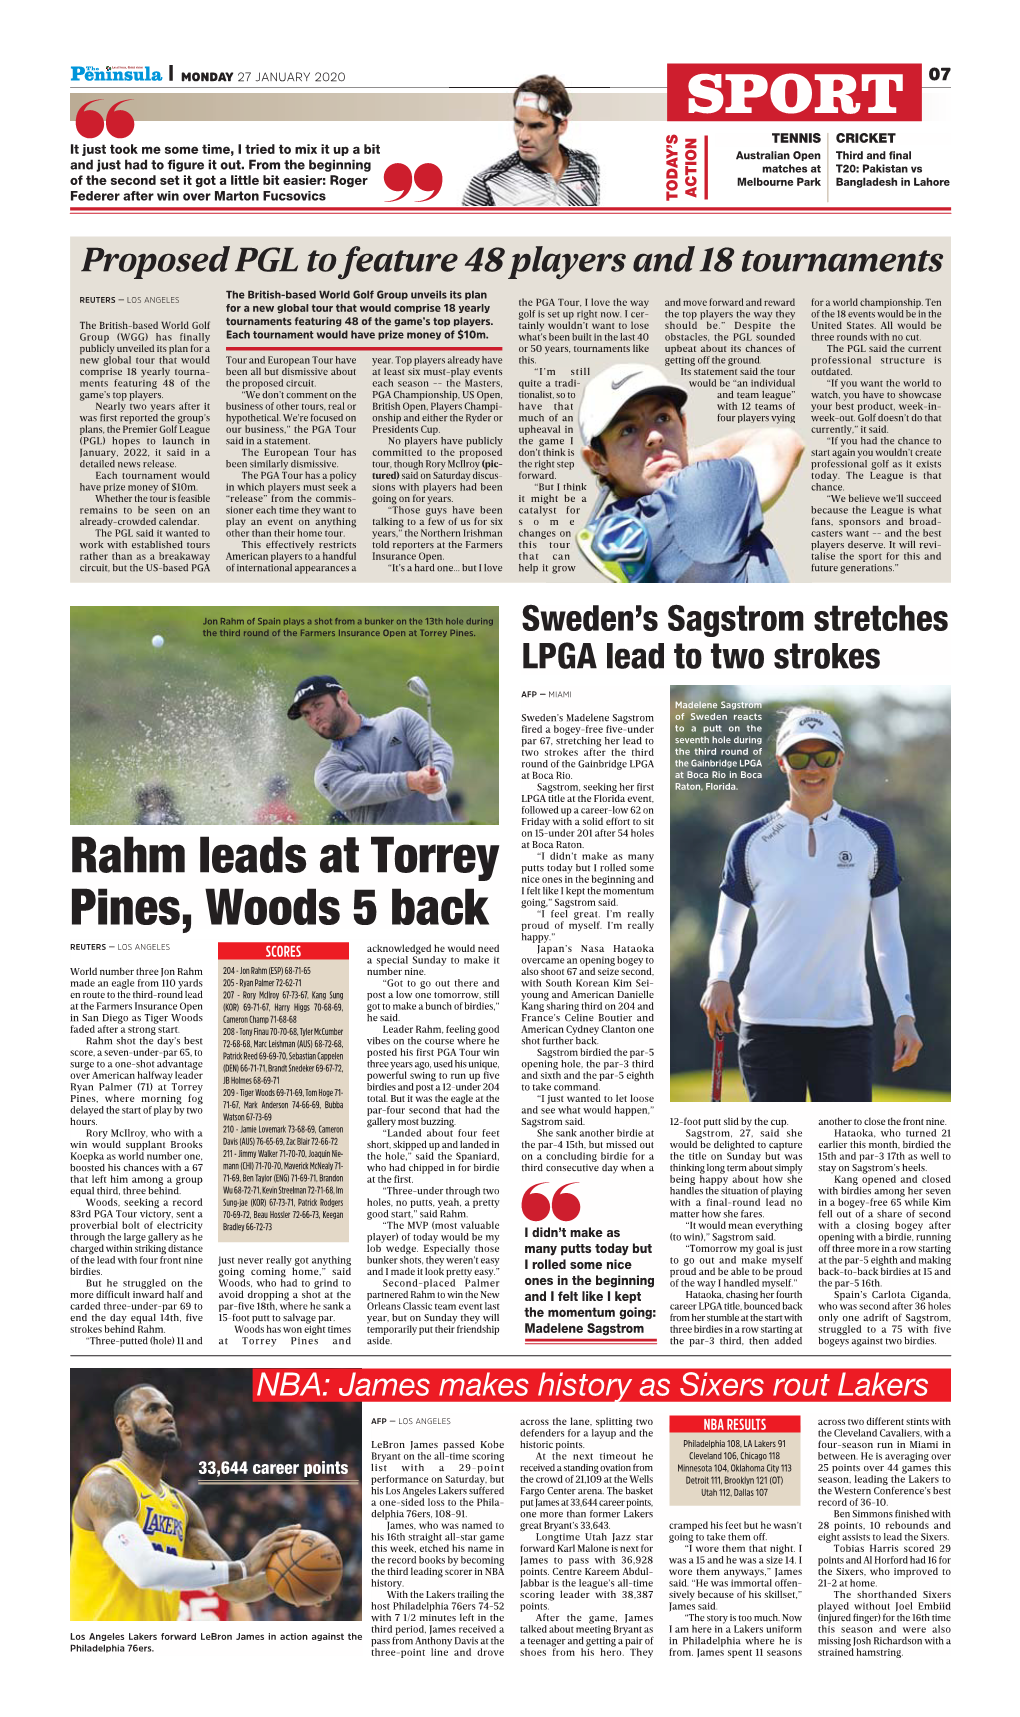 SPORT Rahm Leads at Torrey Pines, Woods 5 Back